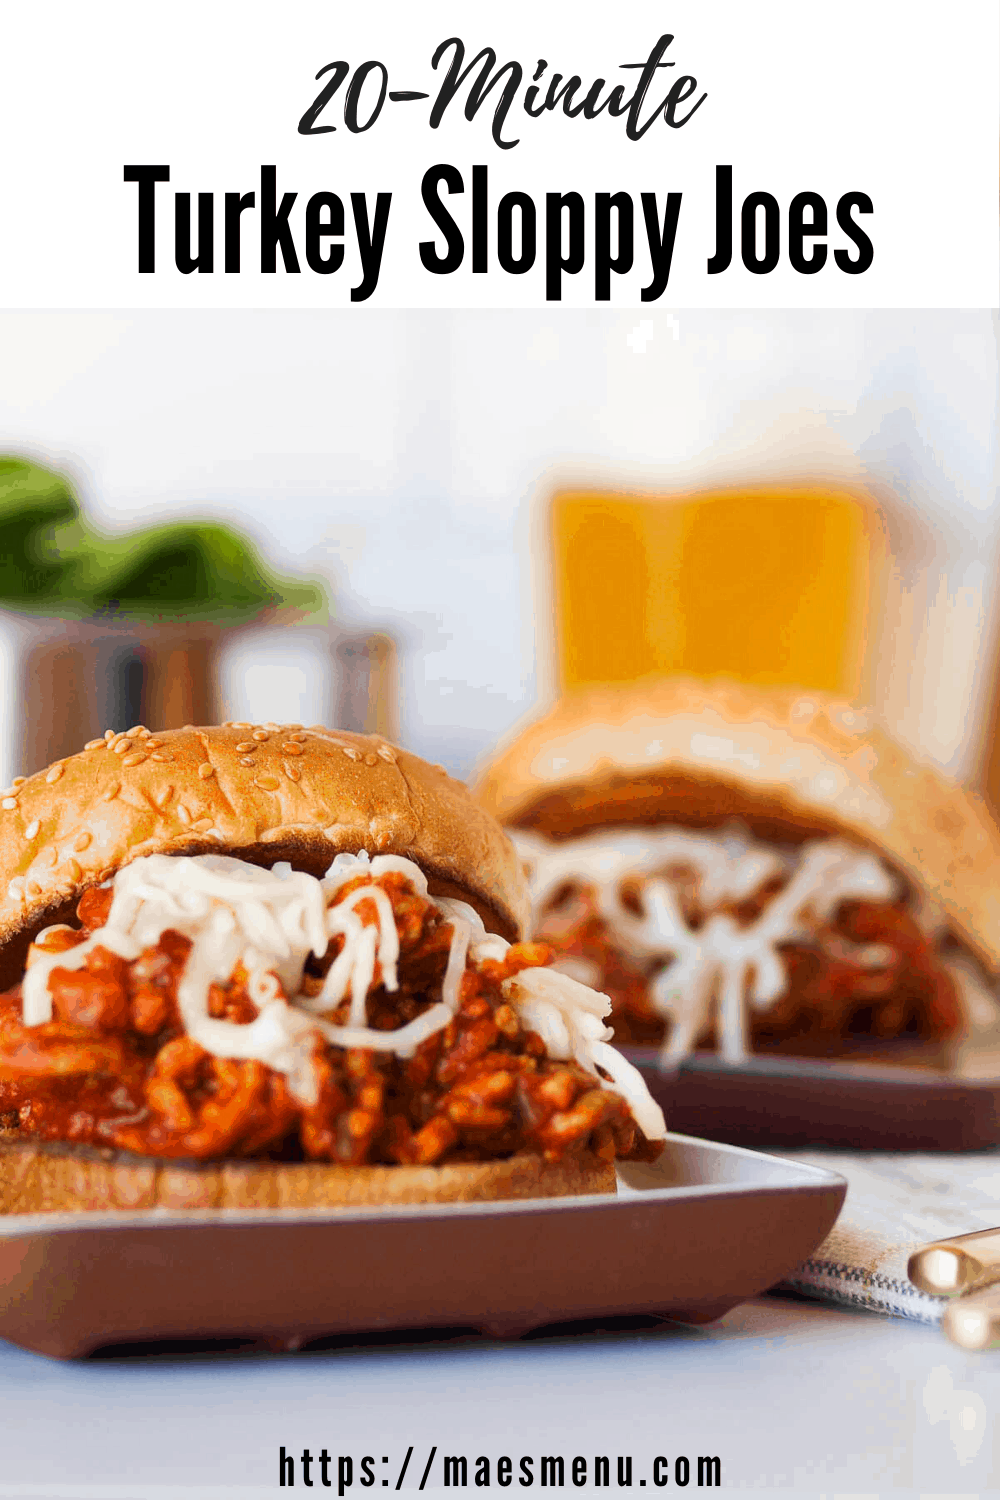 My pinterest pin for turkey sloppy joes. Two plates of sloppy joes in the foreground with glasses of beer and salad in the background.